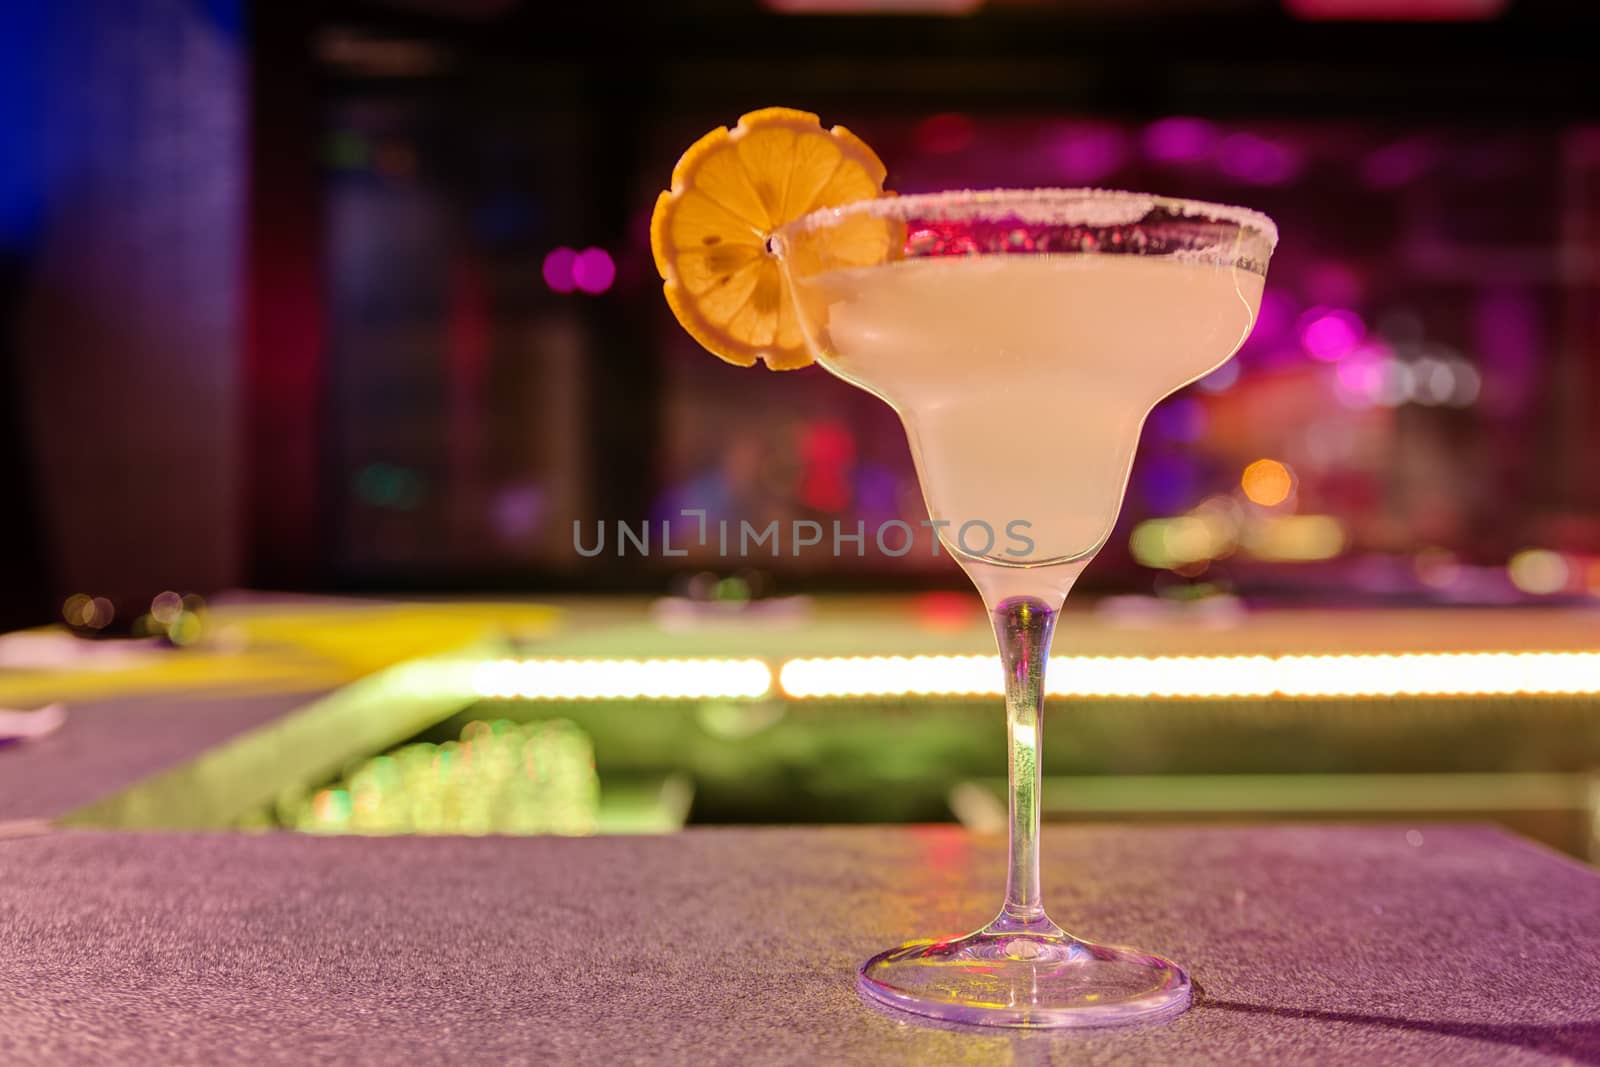 cocktail at bar in a night club with vivid colors